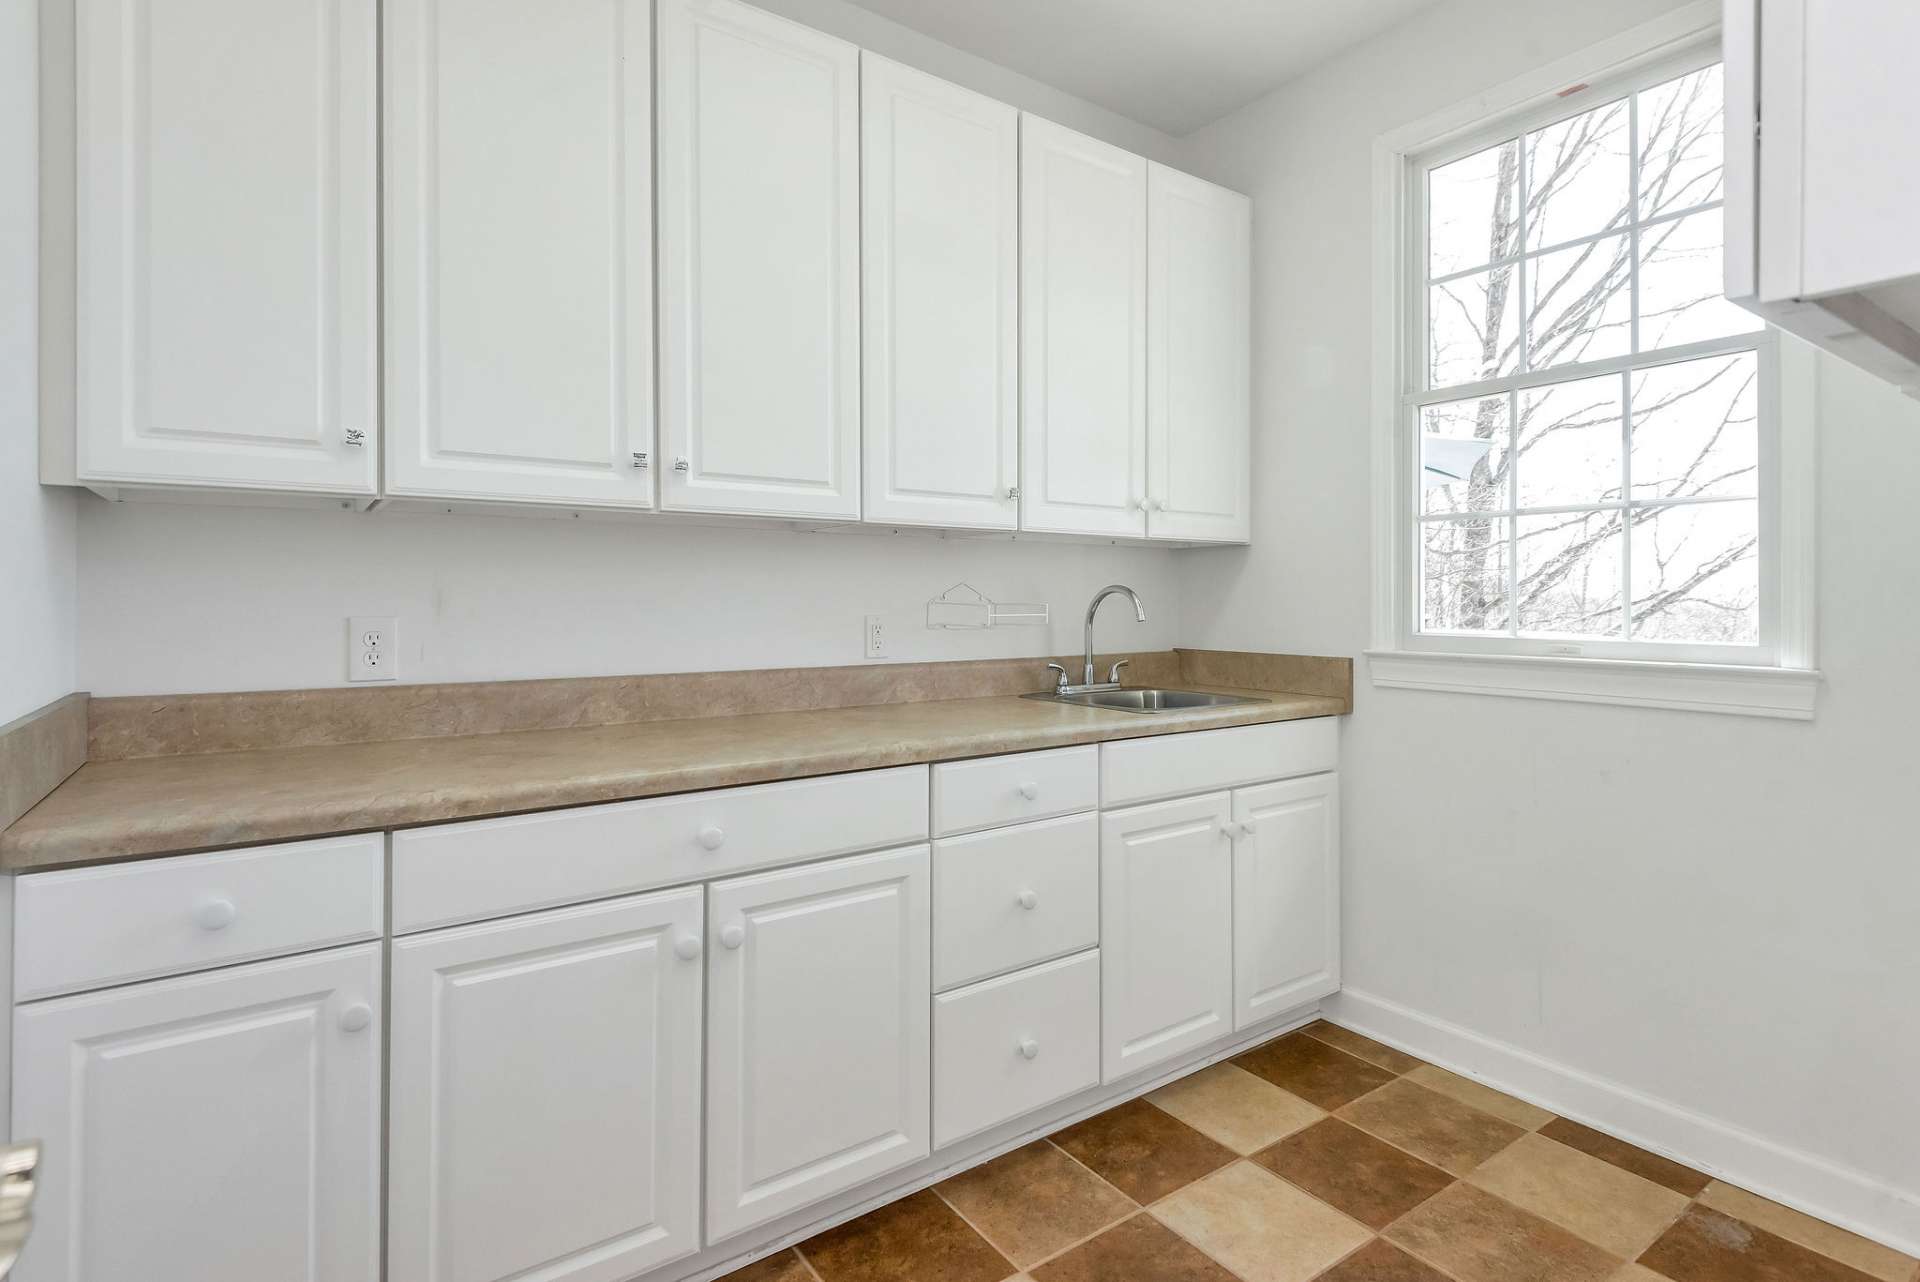 Main level laundry room provides a spacious countertop stretching along one wall, providing ample space for folding clothes. Abundant cabinetry offers plenty of storage for laundry supplies, cleaning products, and household essentials.